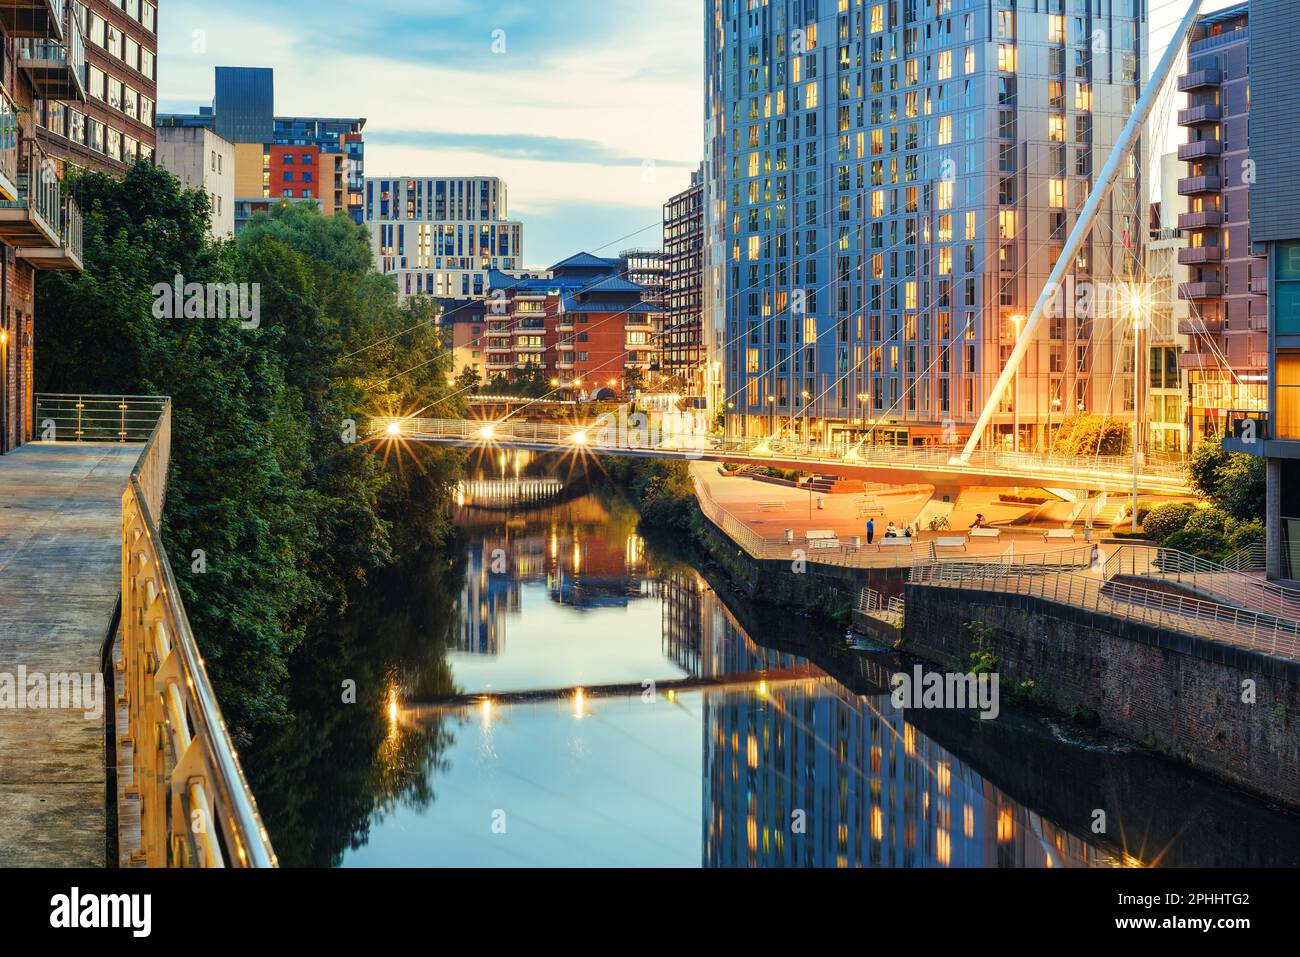 River Irwell banks in Manchester City Centre, England, illuminated in the evening Stock Photo